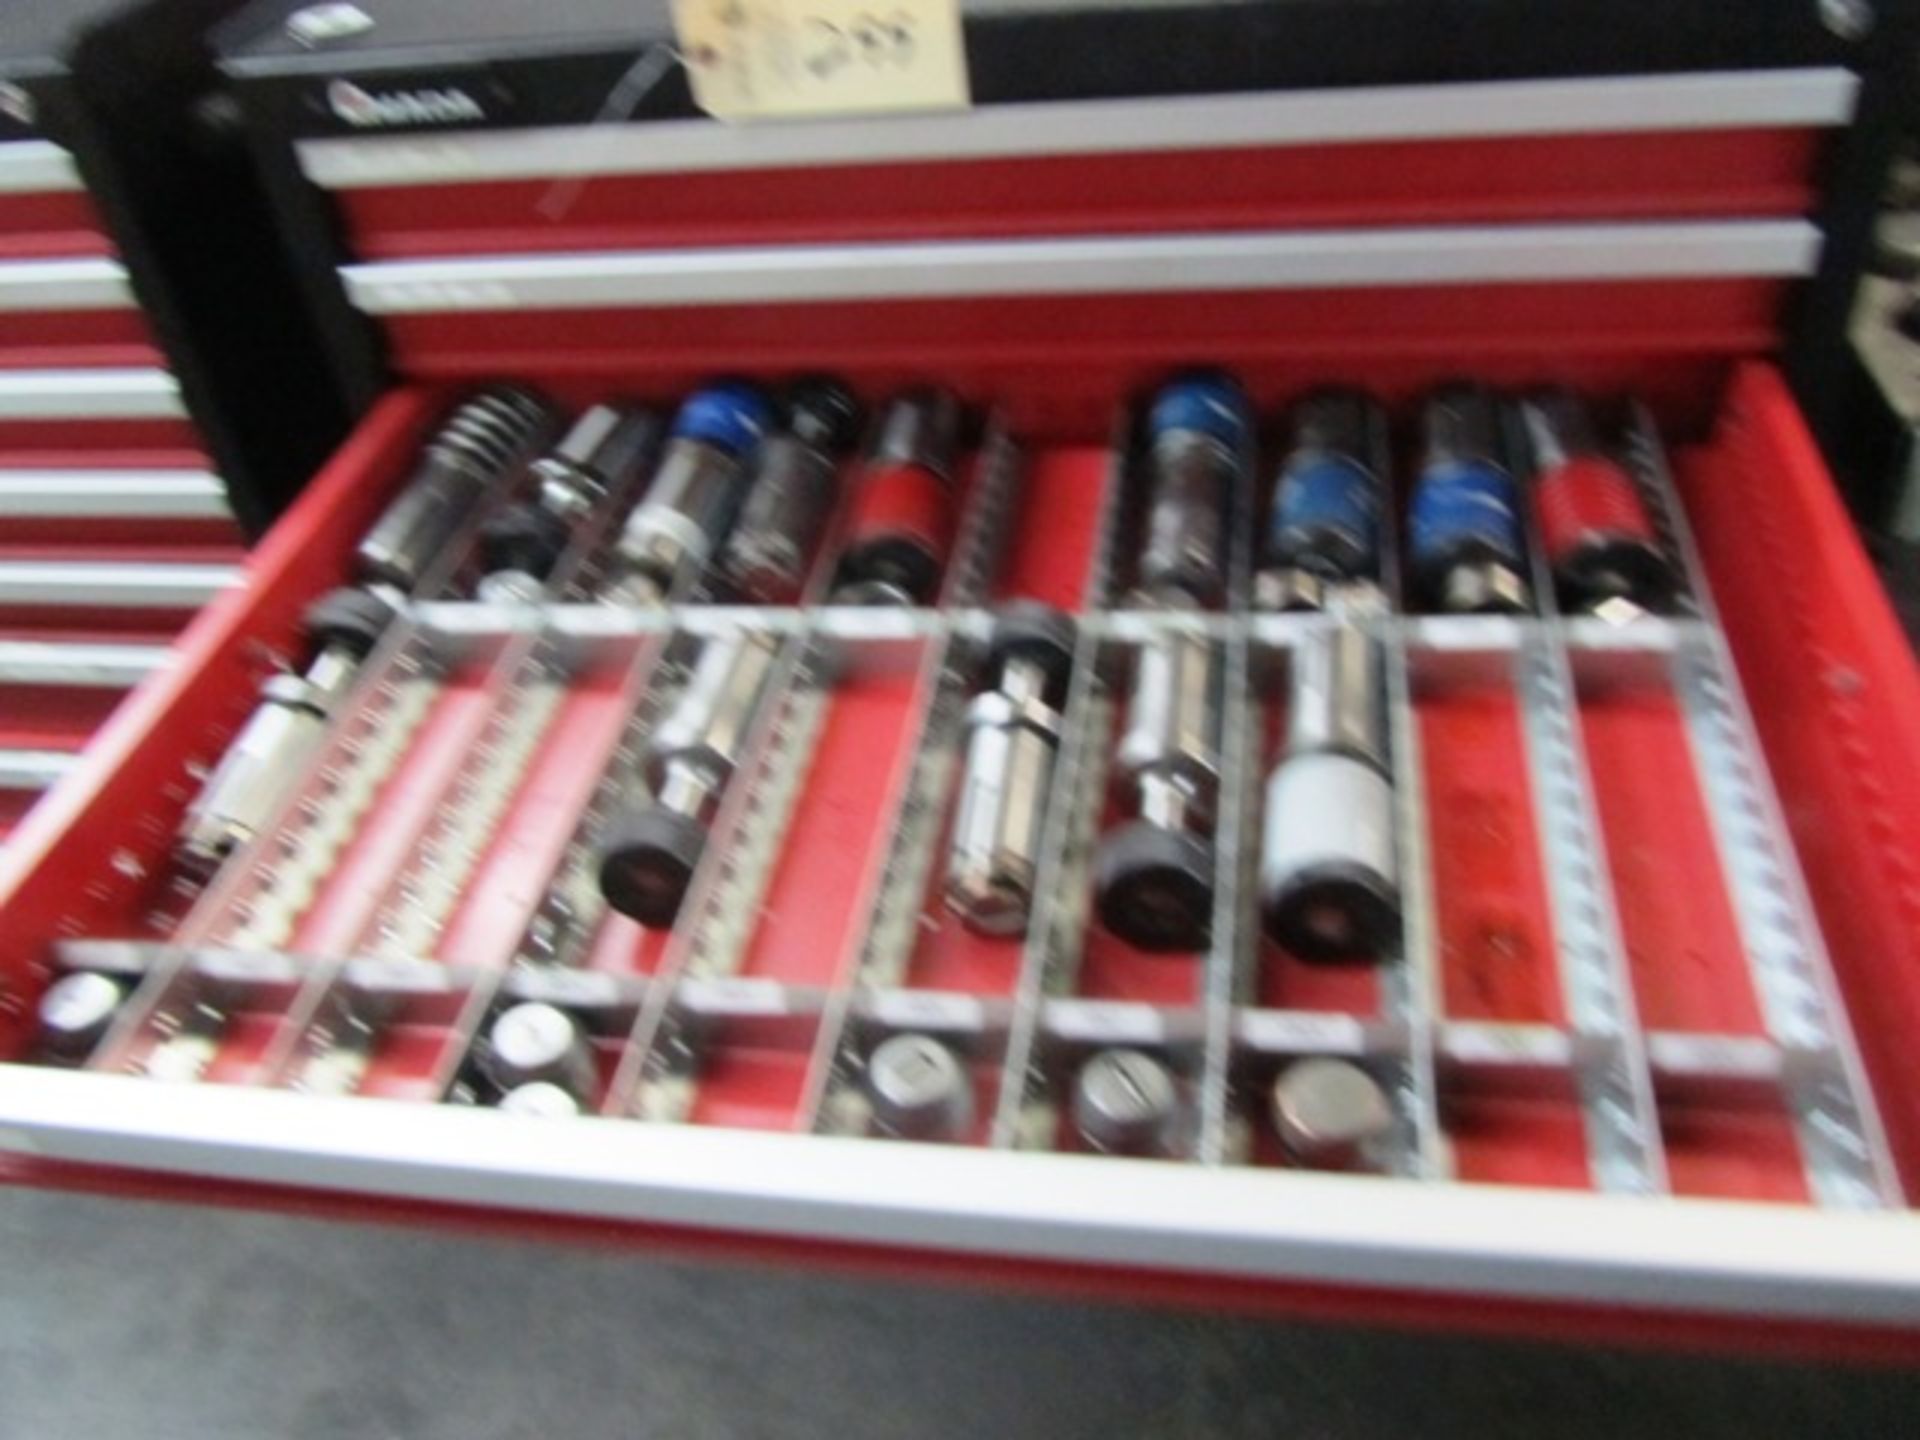 Amada 8 Drawer Portable Tool Cabinet with Turret Punches & Dies - Image 4 of 7